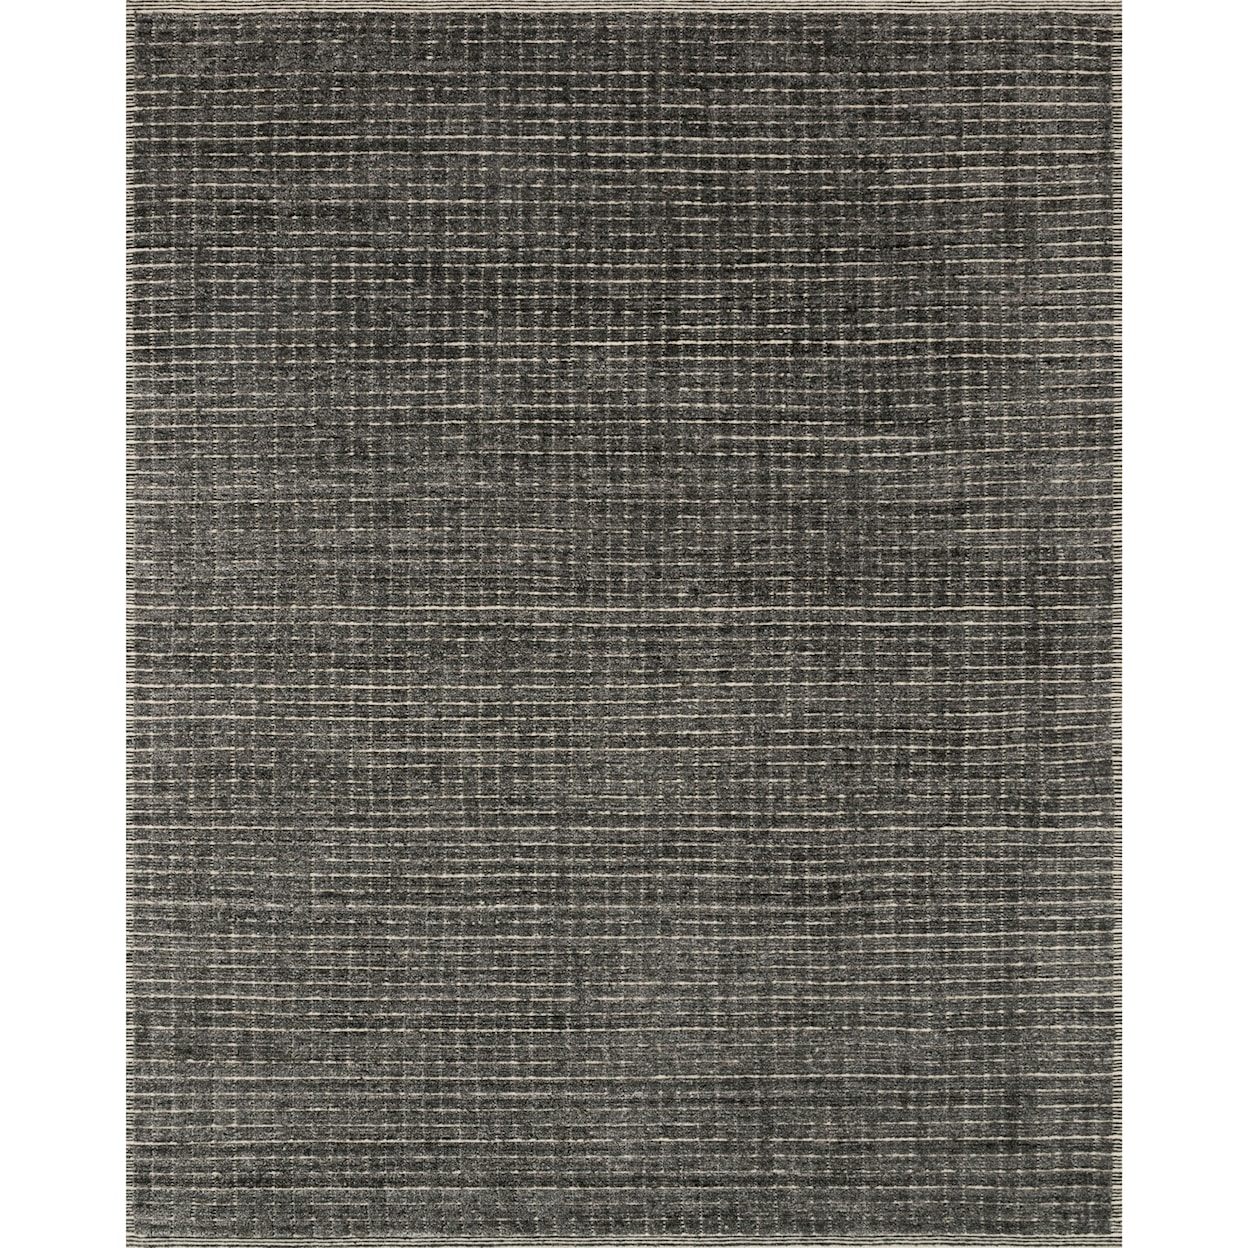 Loloi Rugs Beverly 9'6" x 13'6" Charcoal Rug